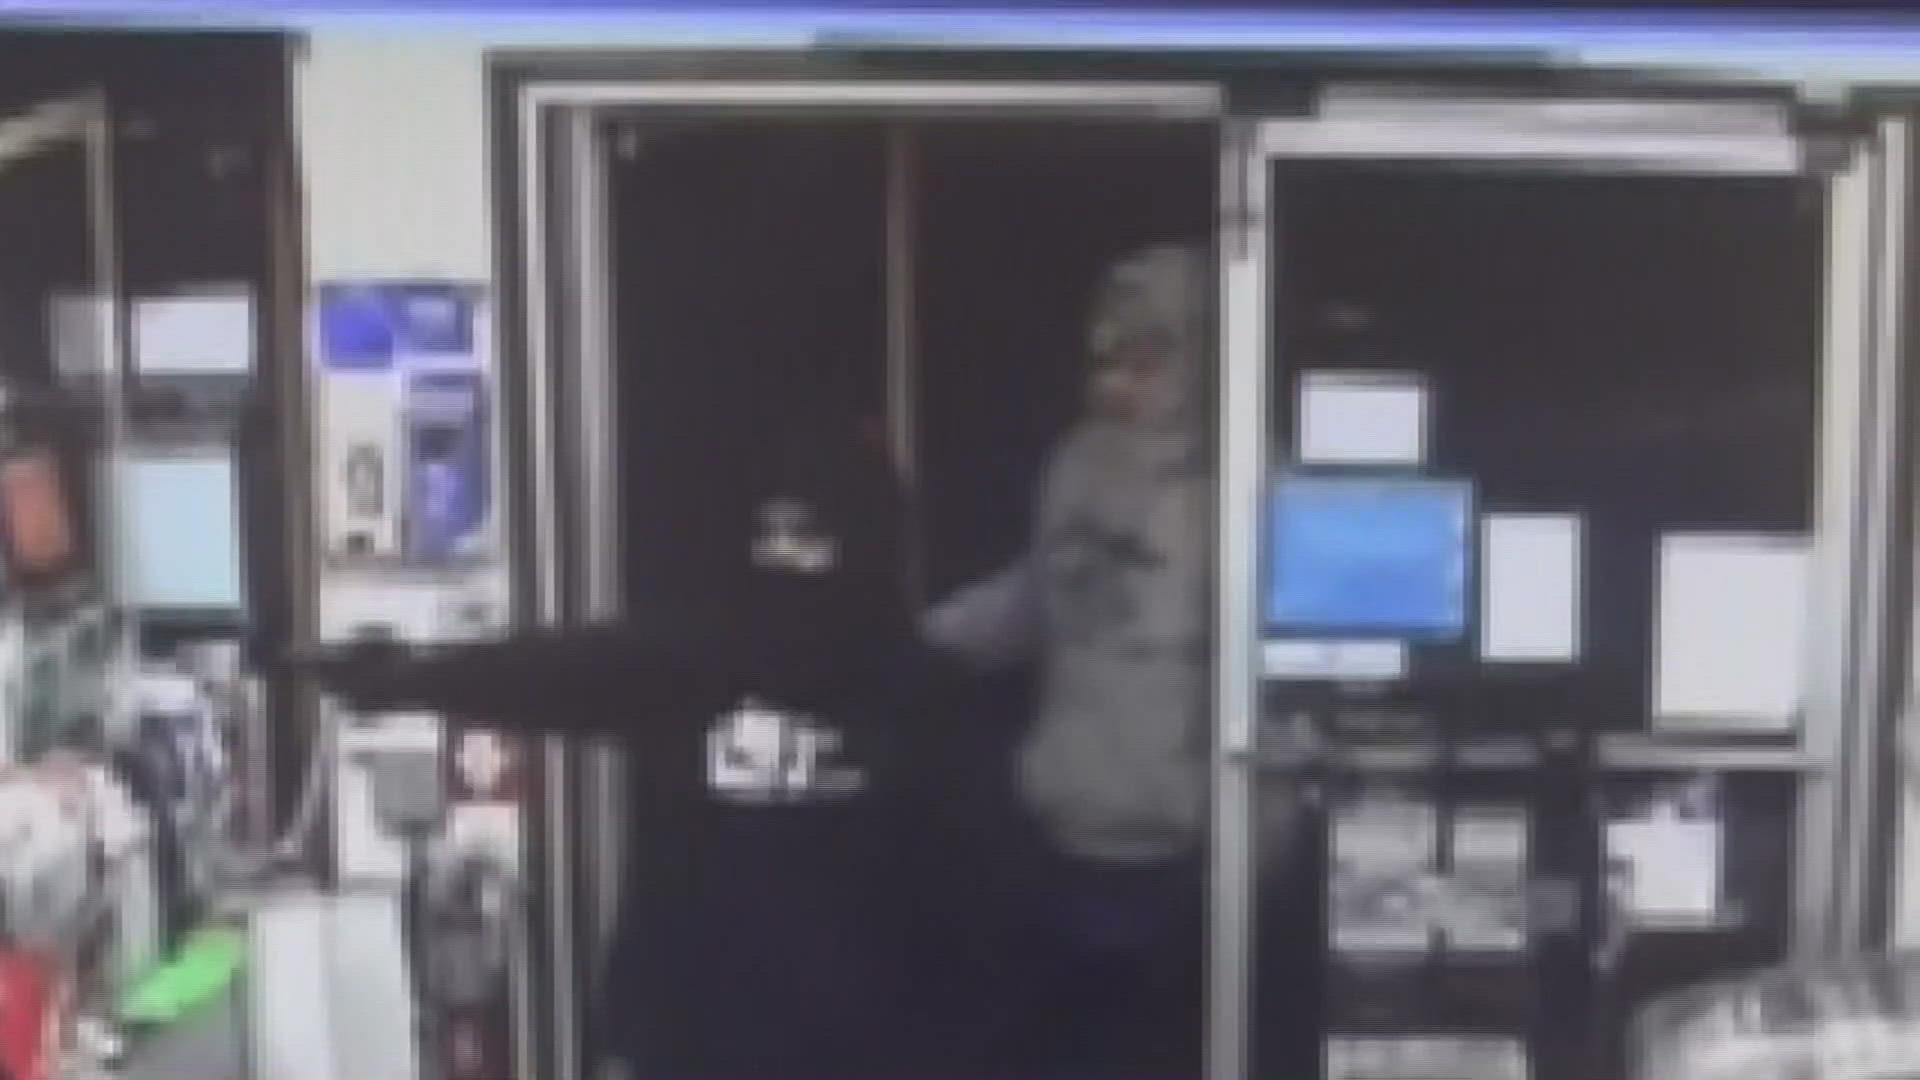 Two male suspects held up the store clerk at gun point and left with the store's cash and keys, and the clerk's purse.